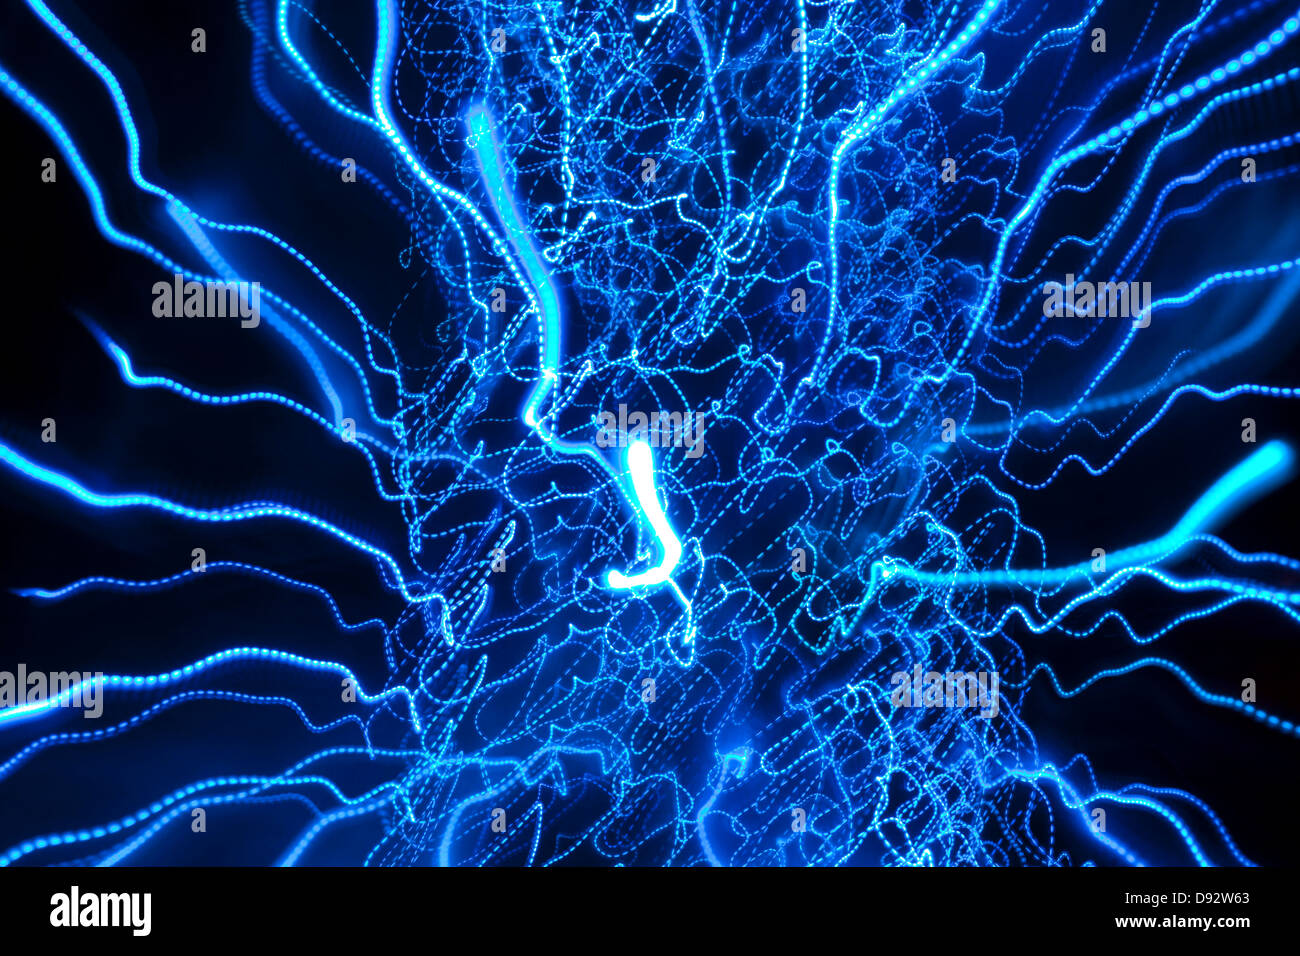 Blue squiggly light pattern Stock Photo